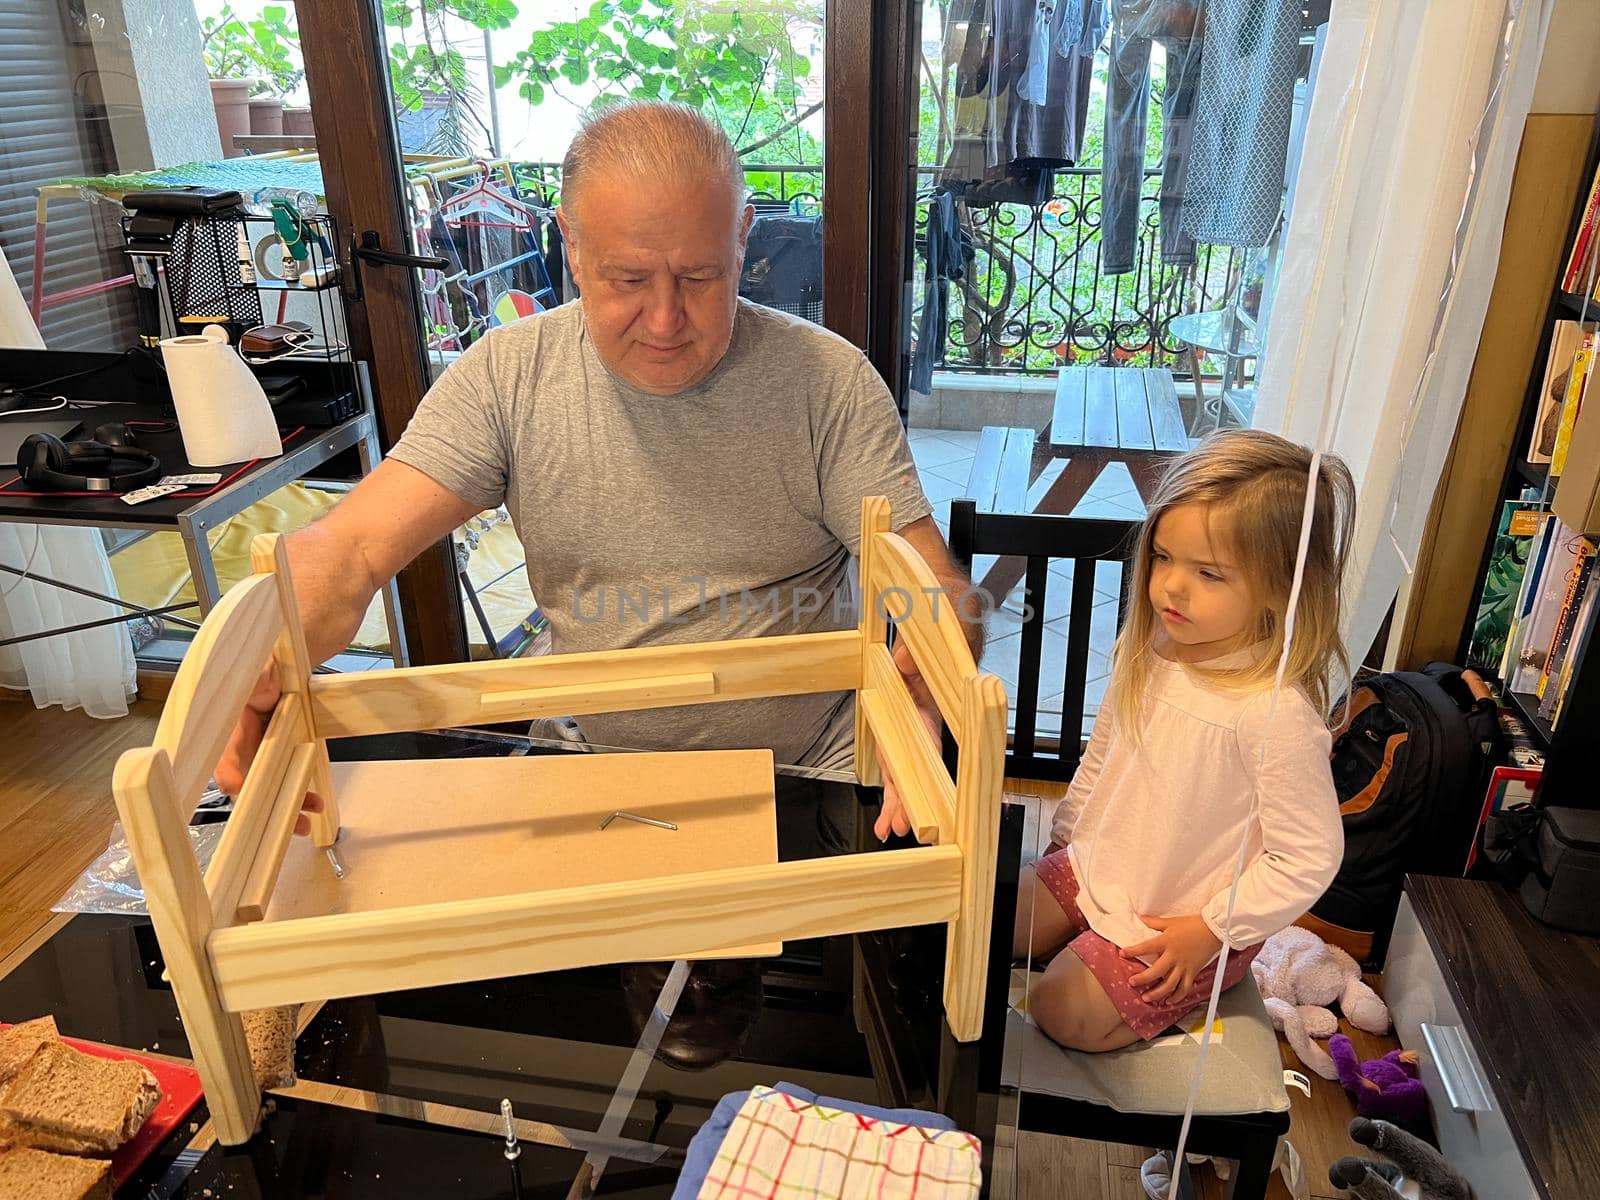 Grandpa assembled a toy wooden bed for a little girl by Nadtochiy